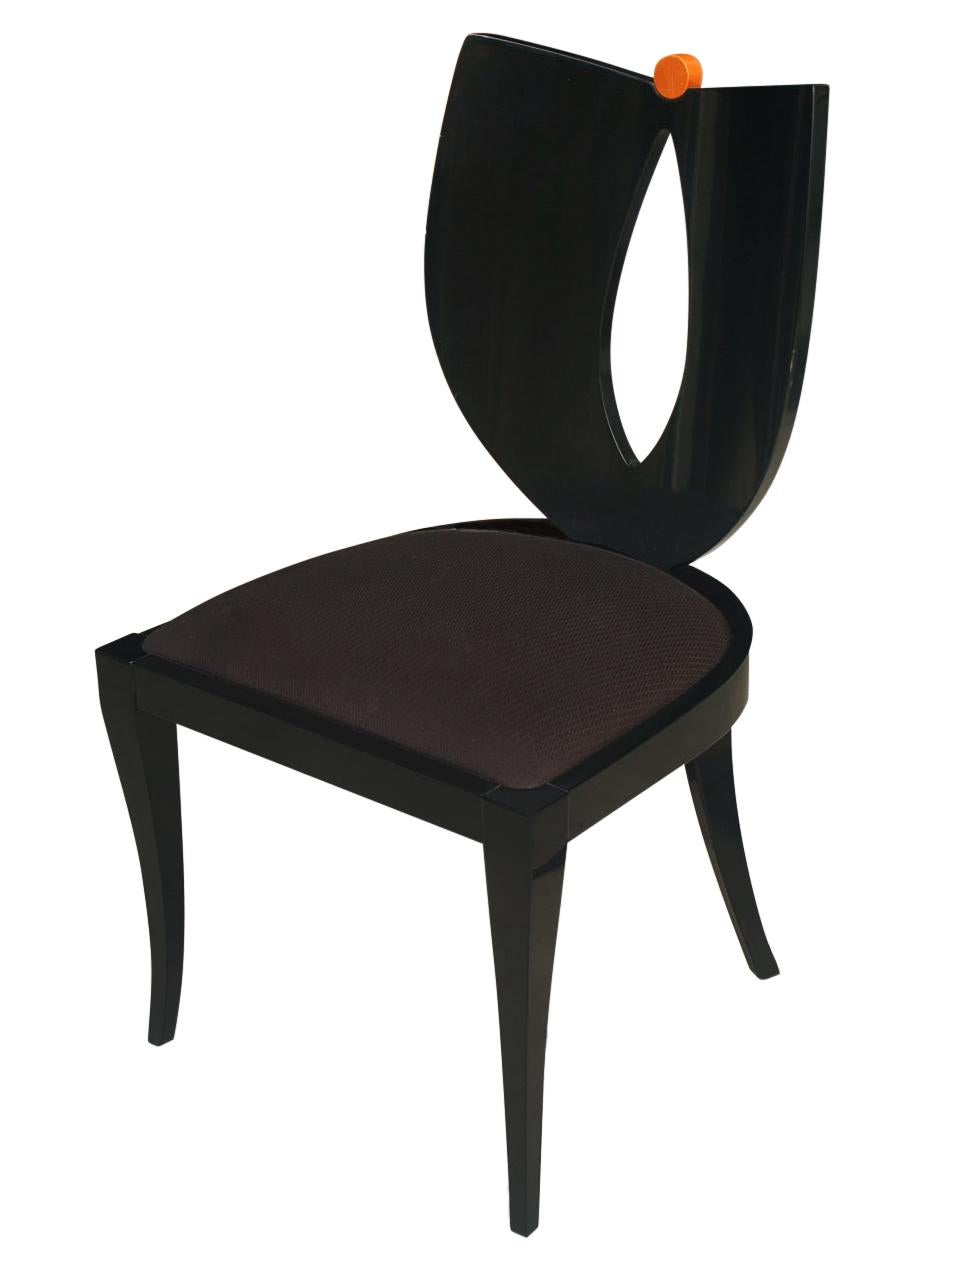 Late 20th Century Set of Six Midcentury Italian Postmodern Black Lacquer Armless Dining Chairs